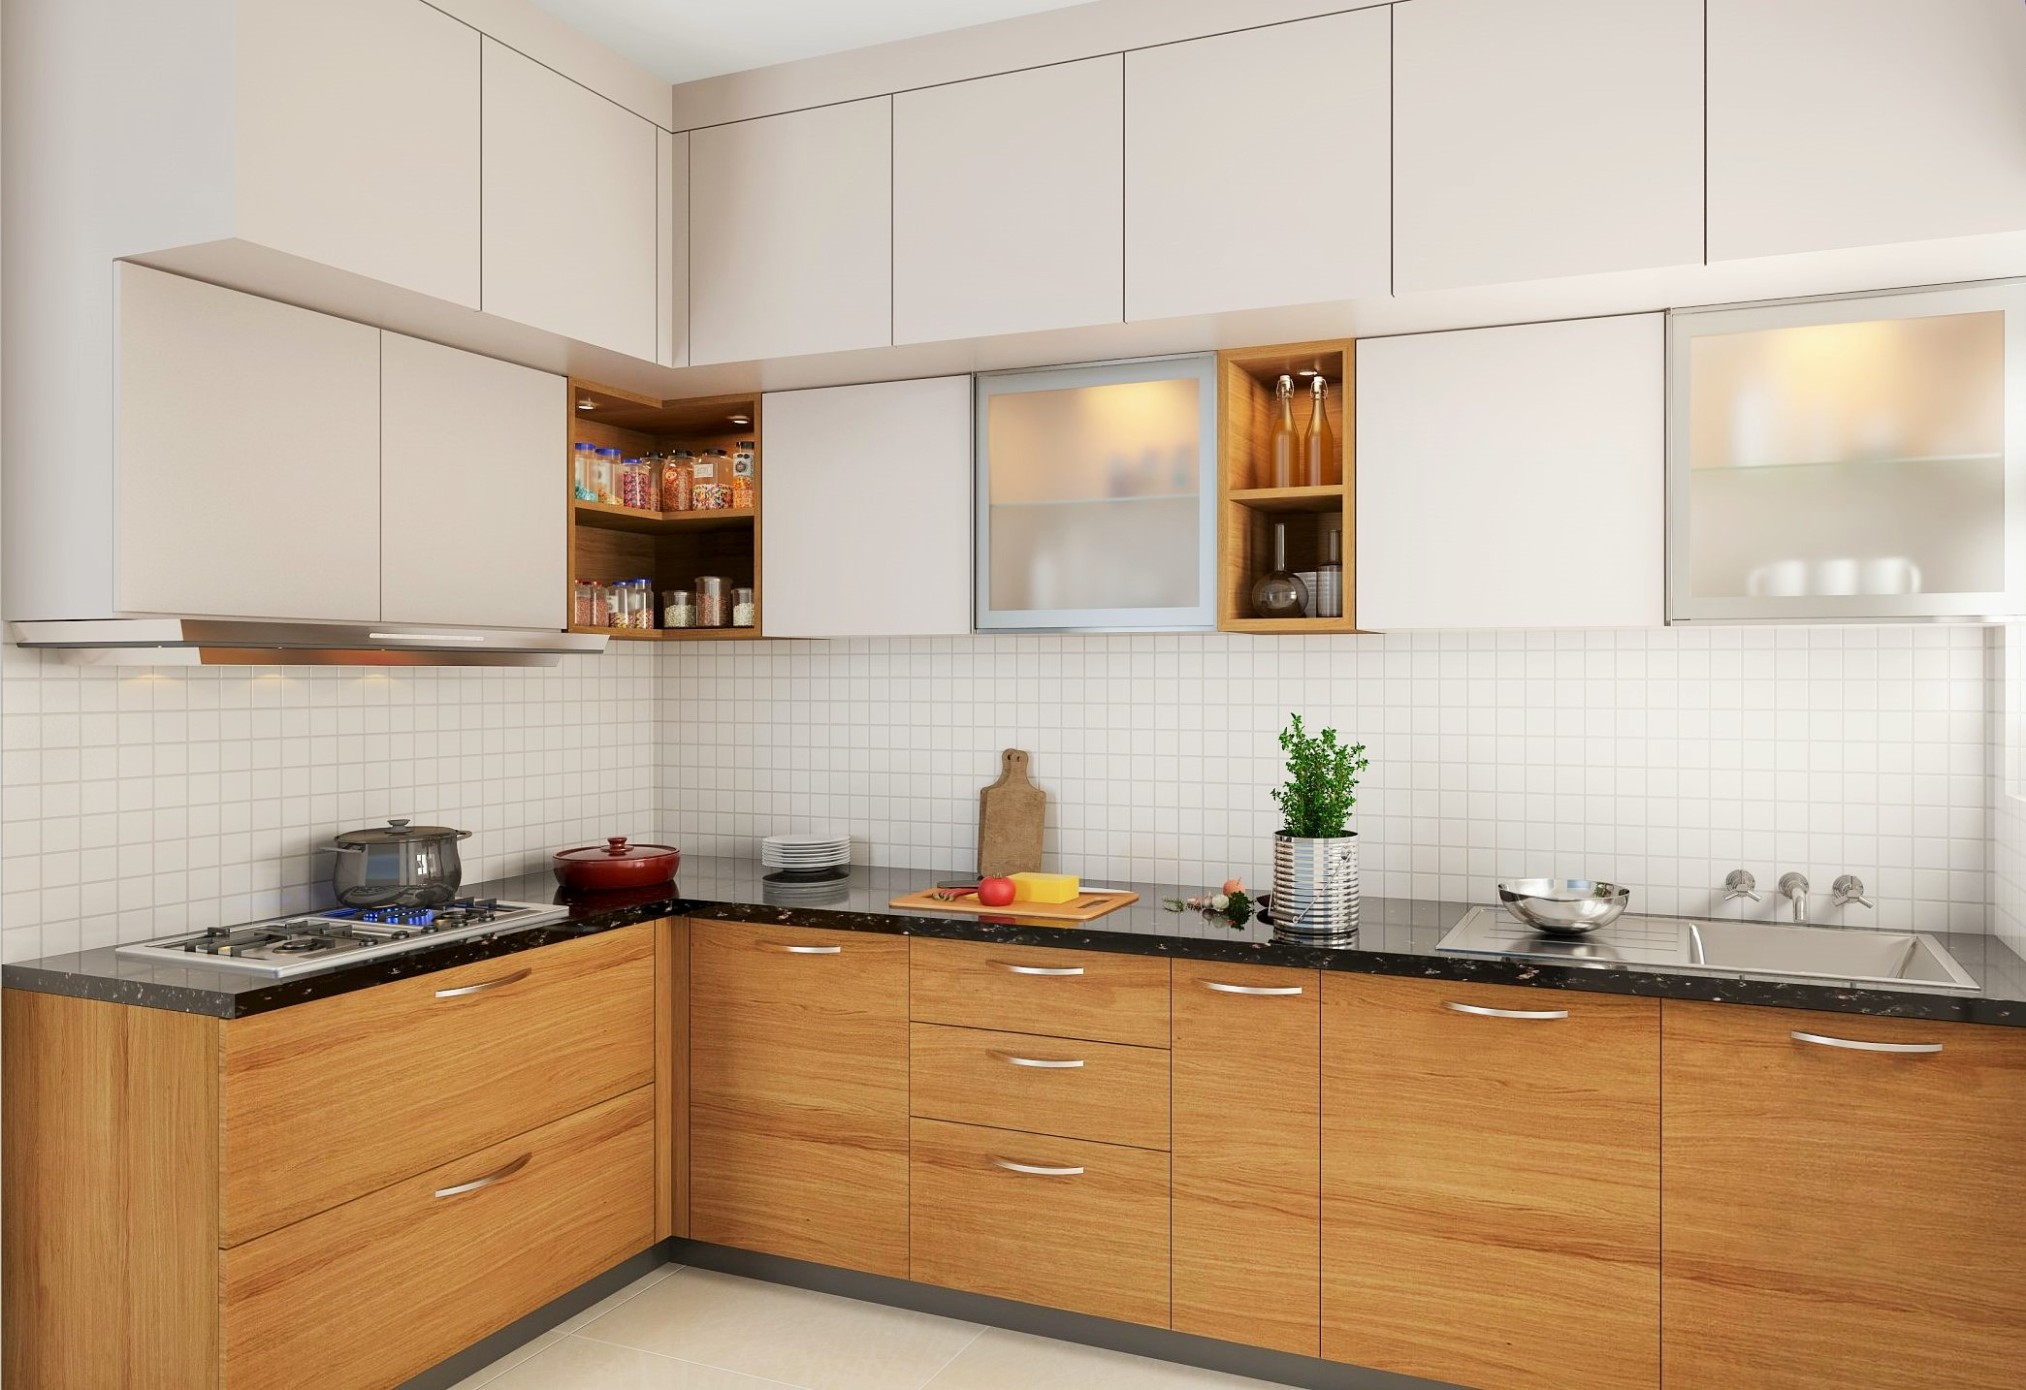 8 Small Kitchen Design Ideas That Make a Big Impact – The Urban Guide - kitchen design for a small house